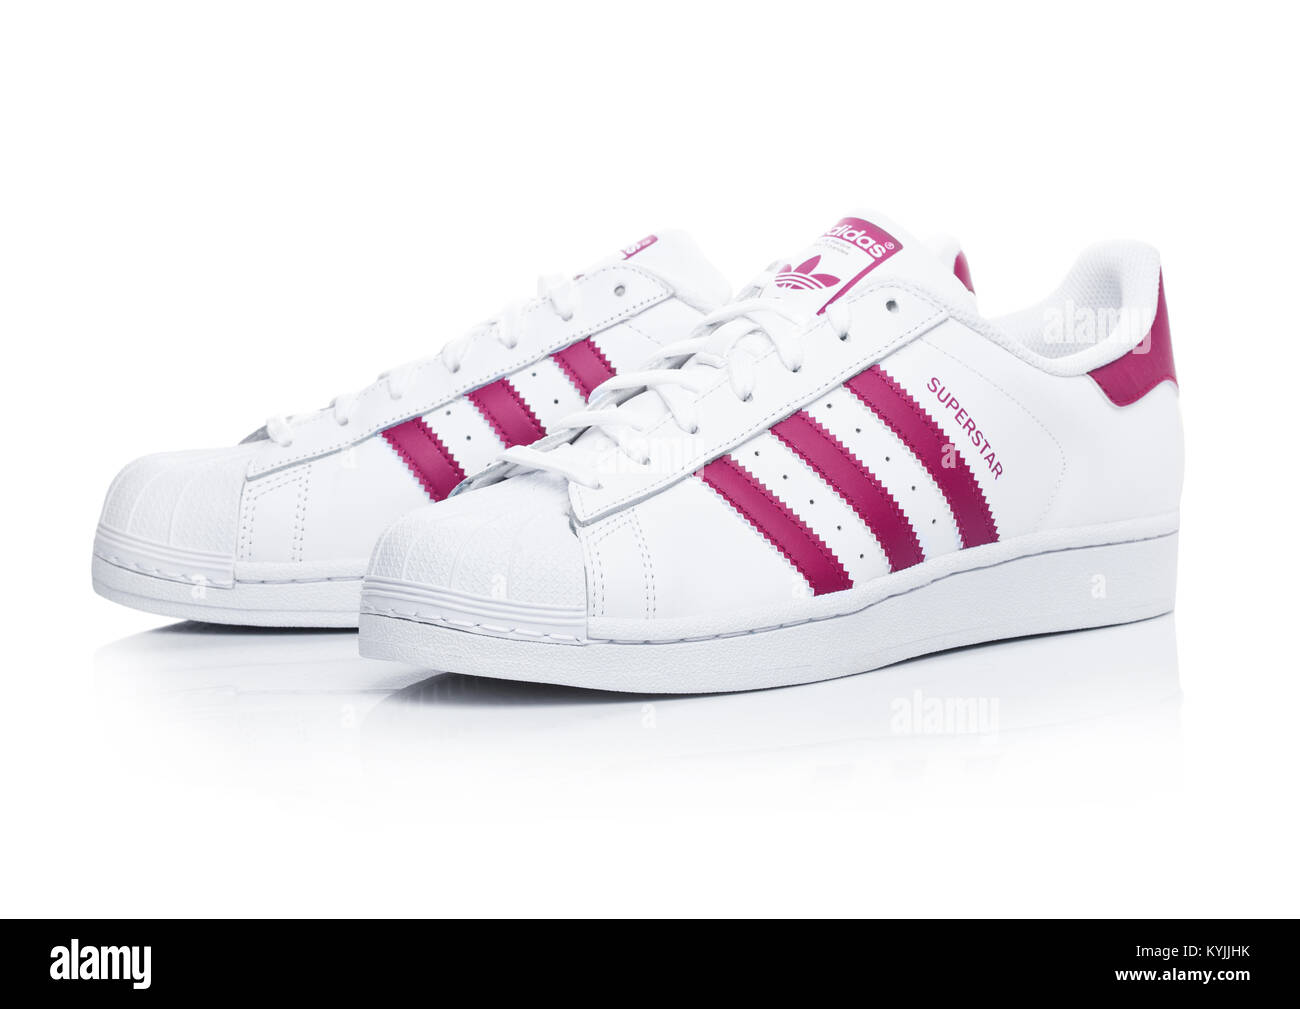 LONDON, UK - JANUARY 12, 2018: Adidas Originals Superstar red shoes on  white background.German multinational corporation that designs and  manufactures Stock Photo - Alamy